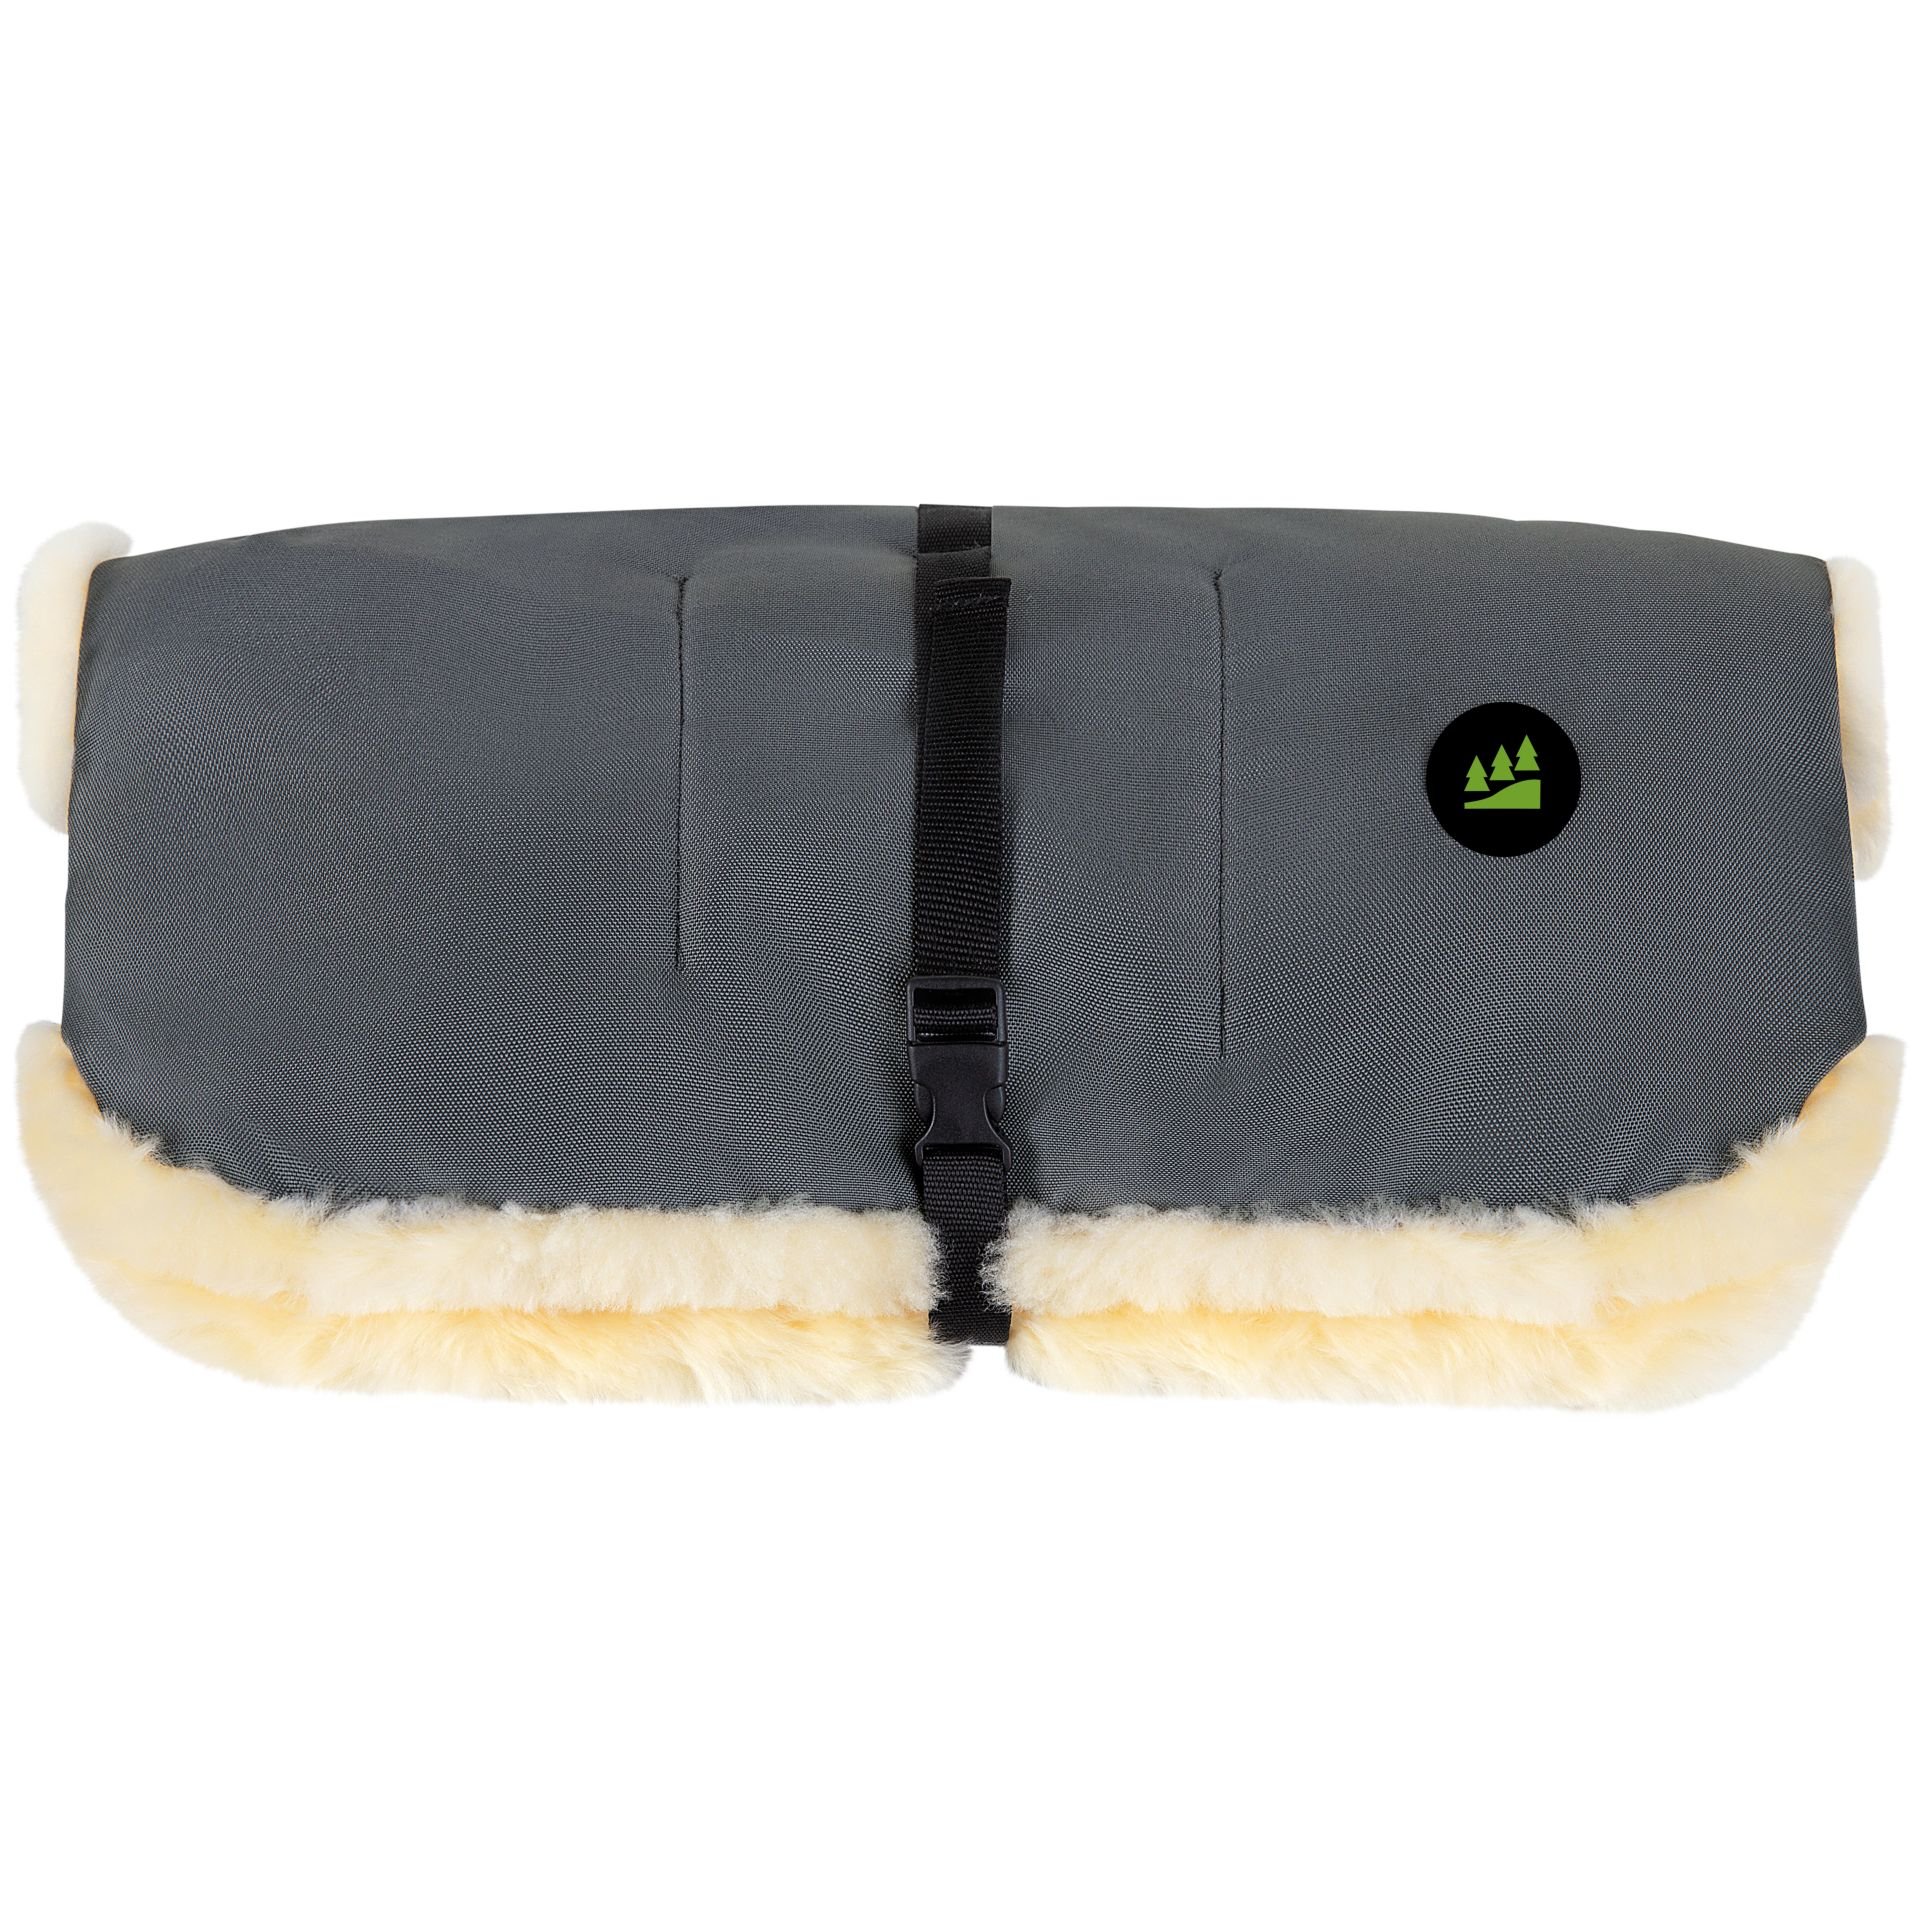 quality days for Odenwälder High lambskin: Muffolo long cold